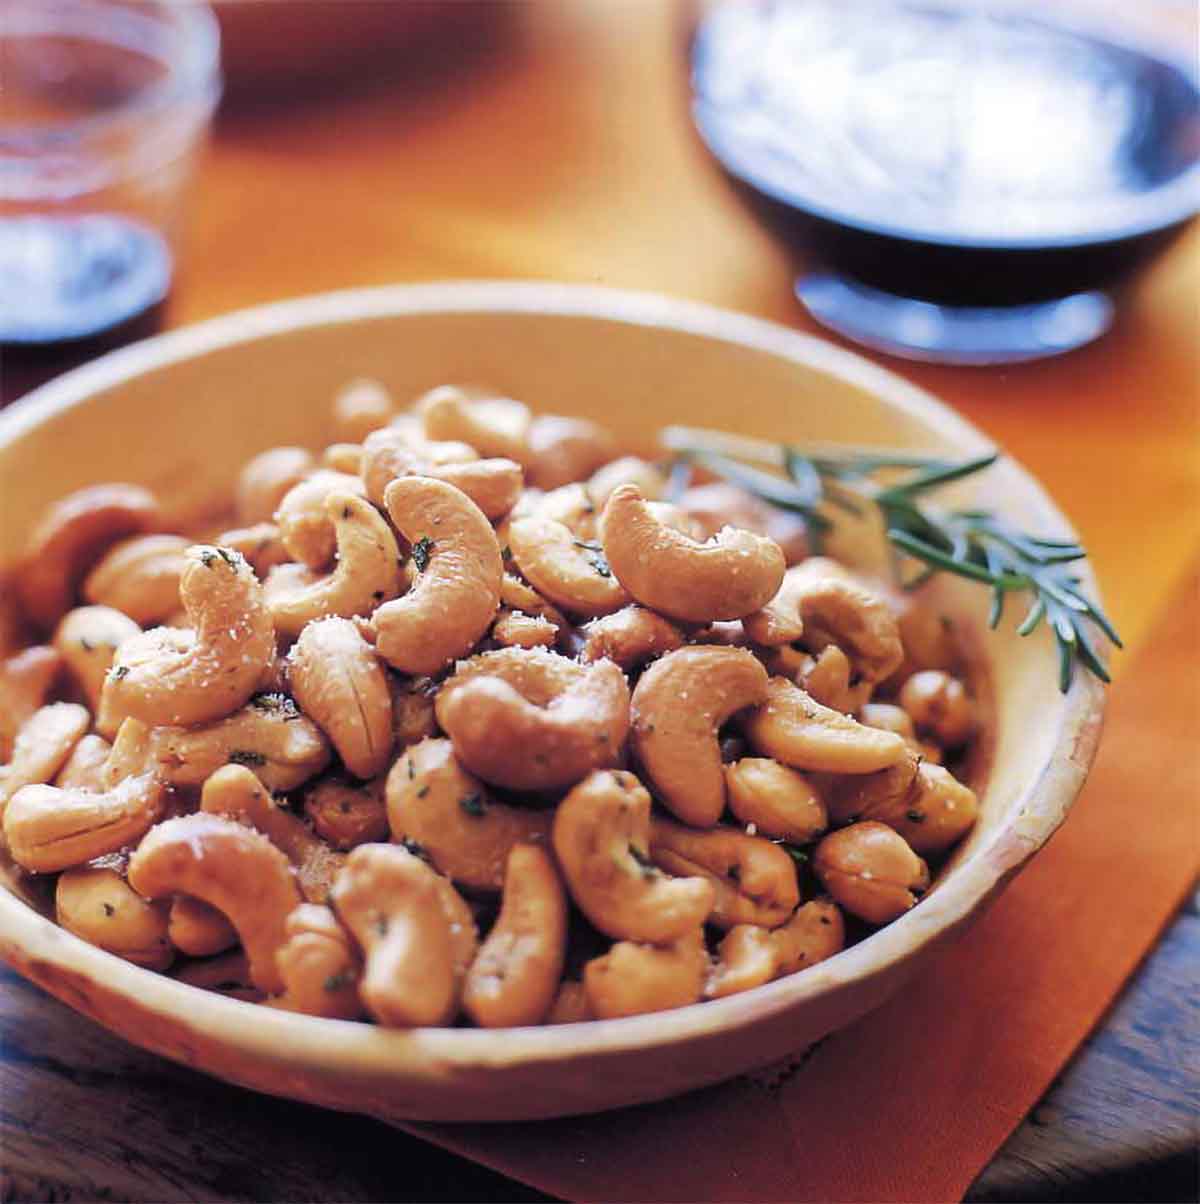 A bowl filled with Ina Garten's rosemary cashews with a sprig of rosemary on the side.